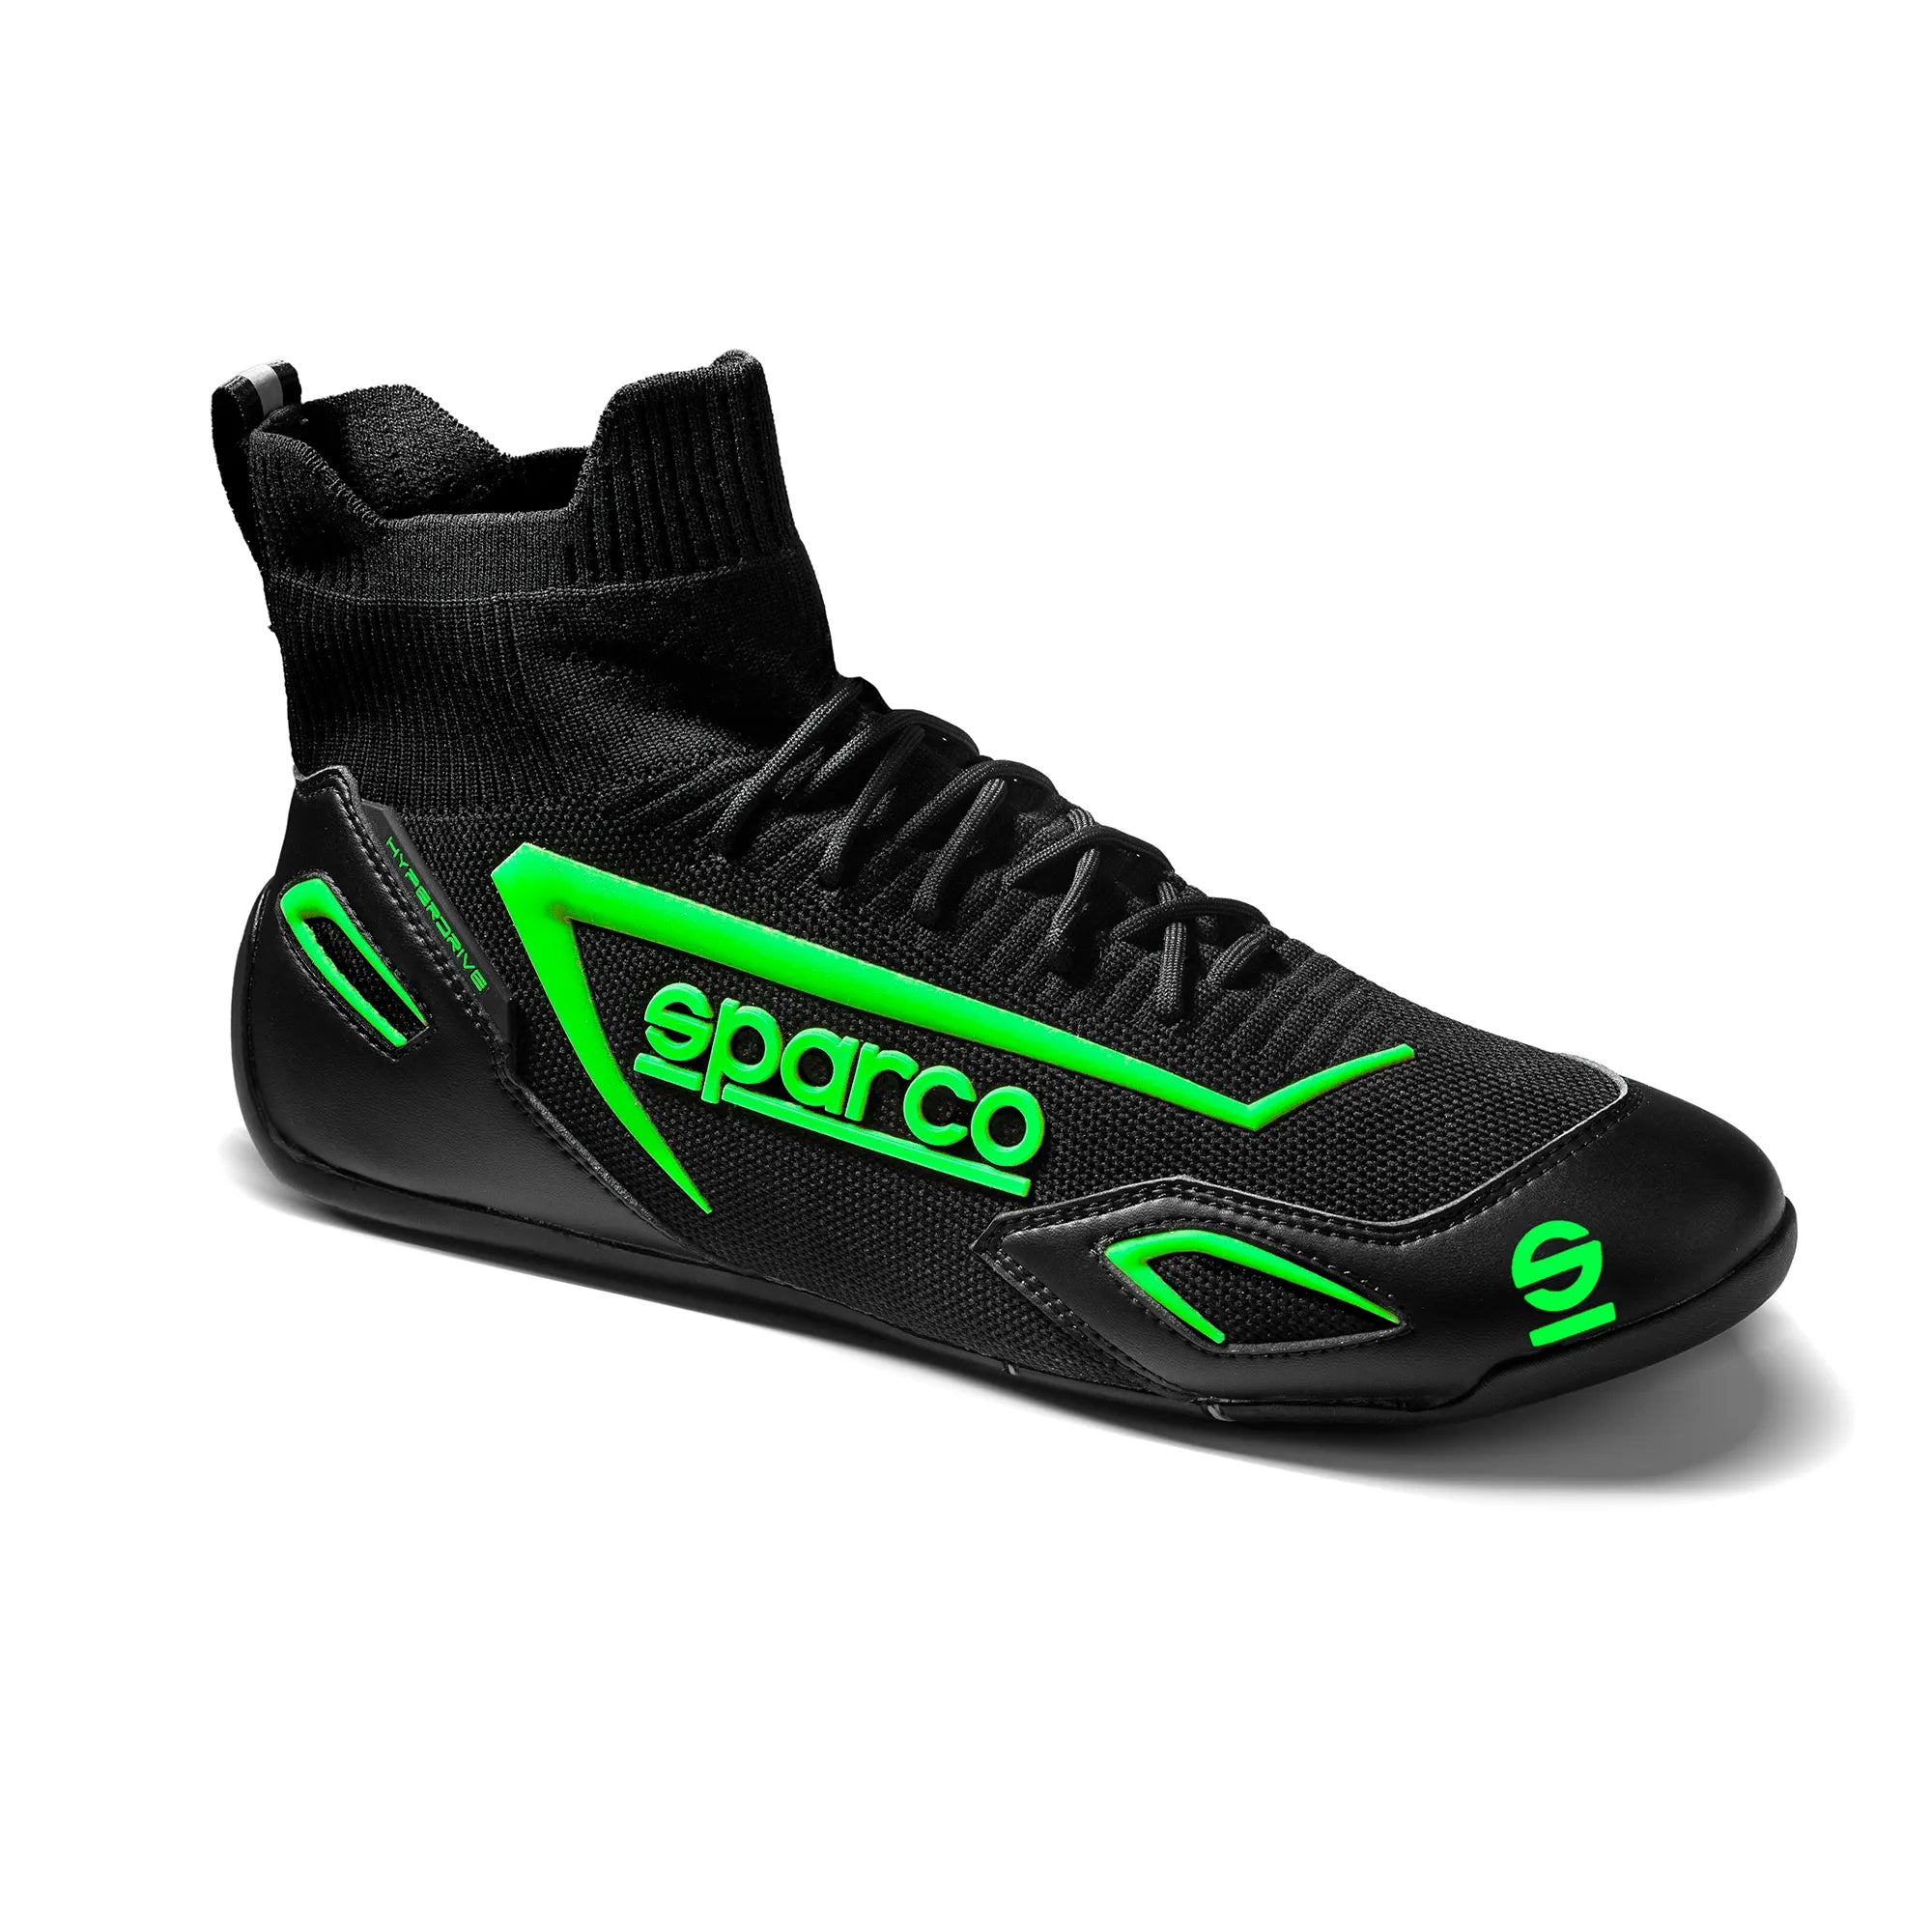 SPARCO 00129341NRVF Gaming sim racing shoes HYPERDRIVE, black/green, size 41 Photo-1 